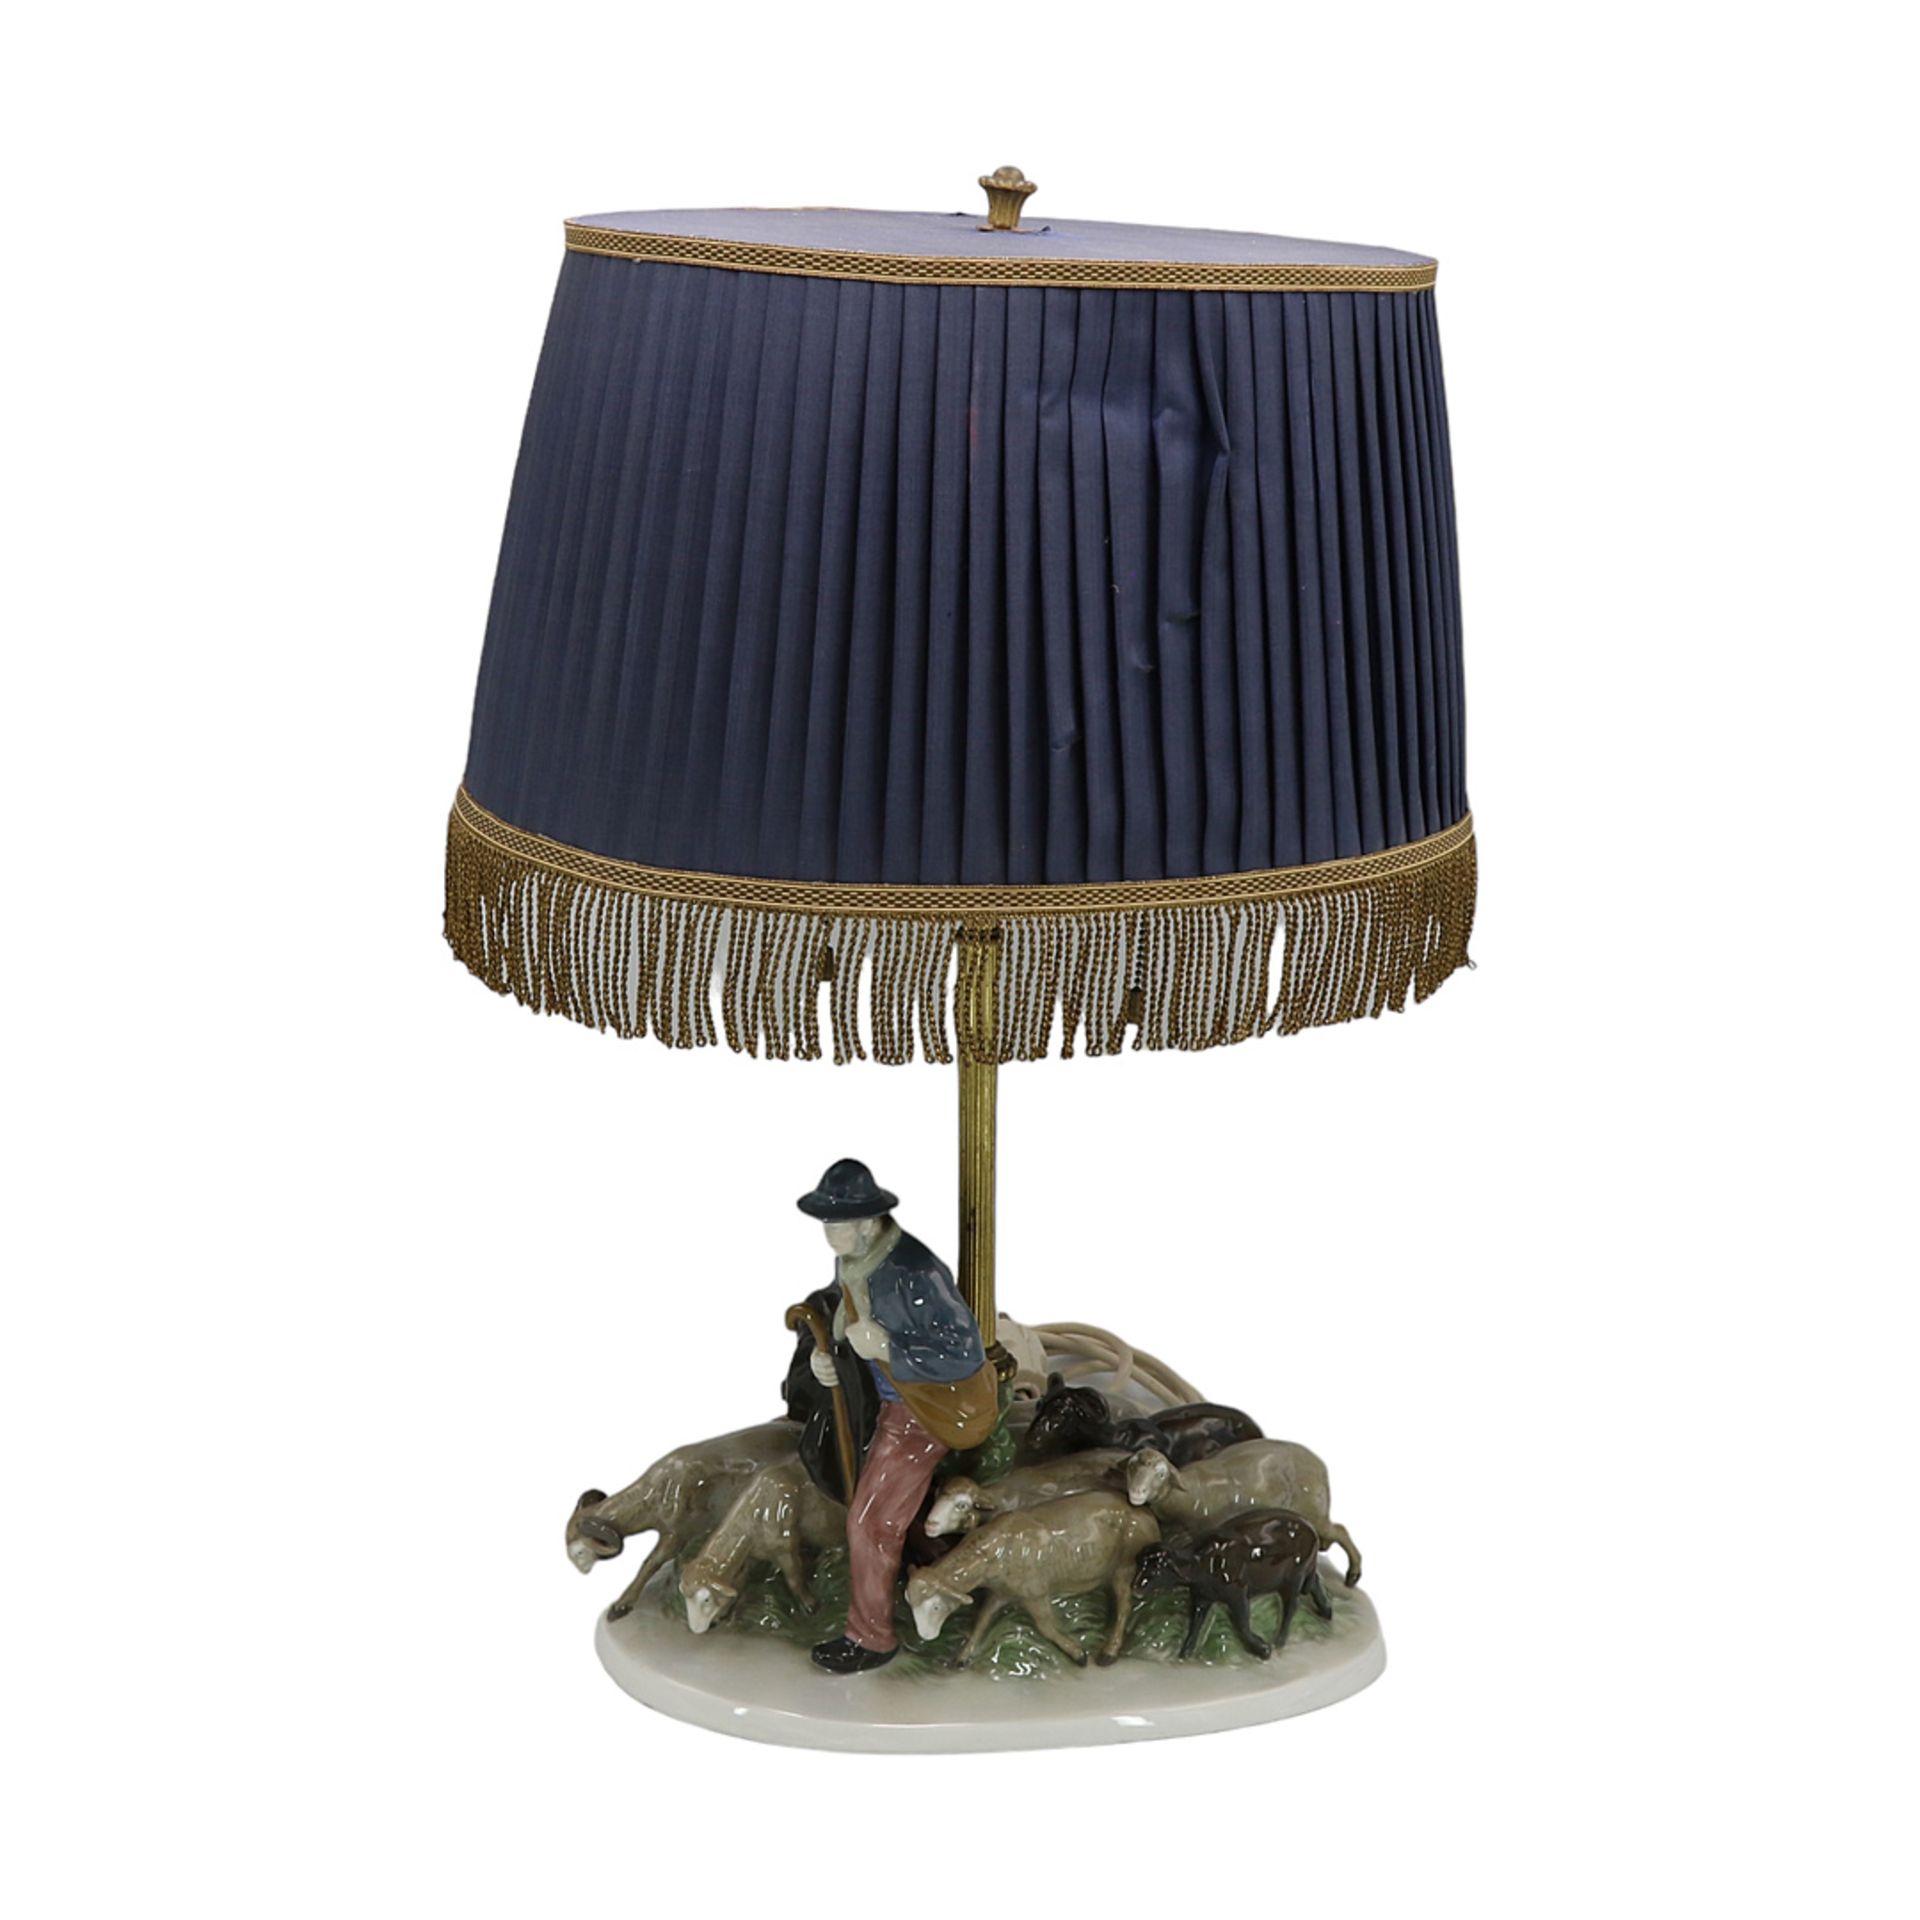 Fraureuth table lamp, shepherd with flock, 1st half of the 20th century